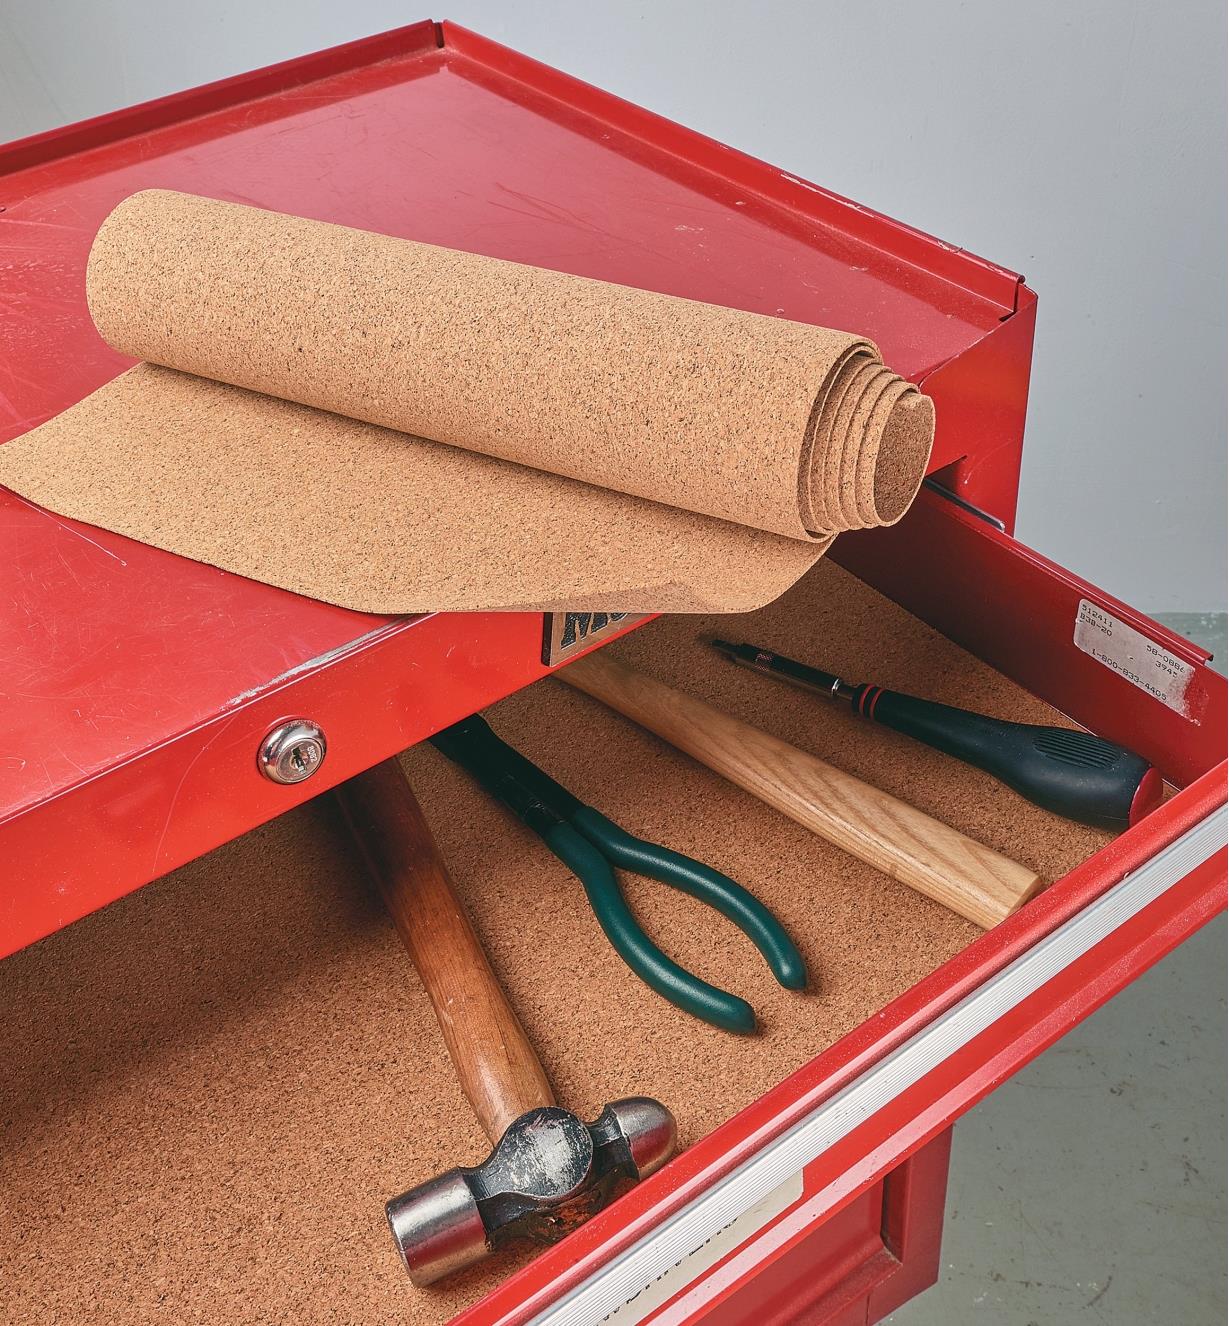 Cork liner used to line a drawer in a tool chest